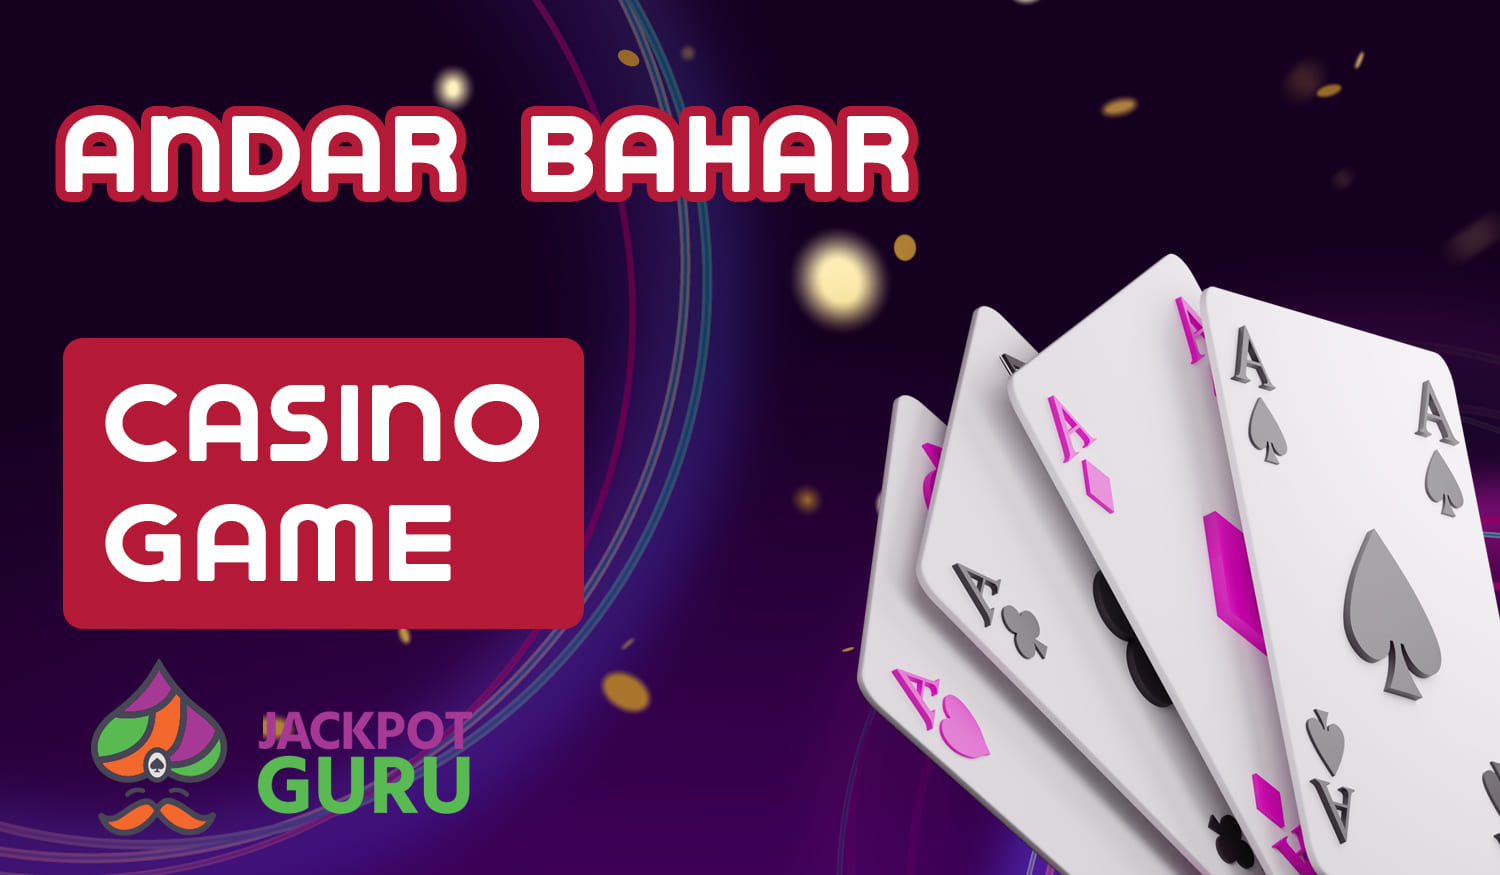 Casino games that Jackpot Guru online casino offers to users from India